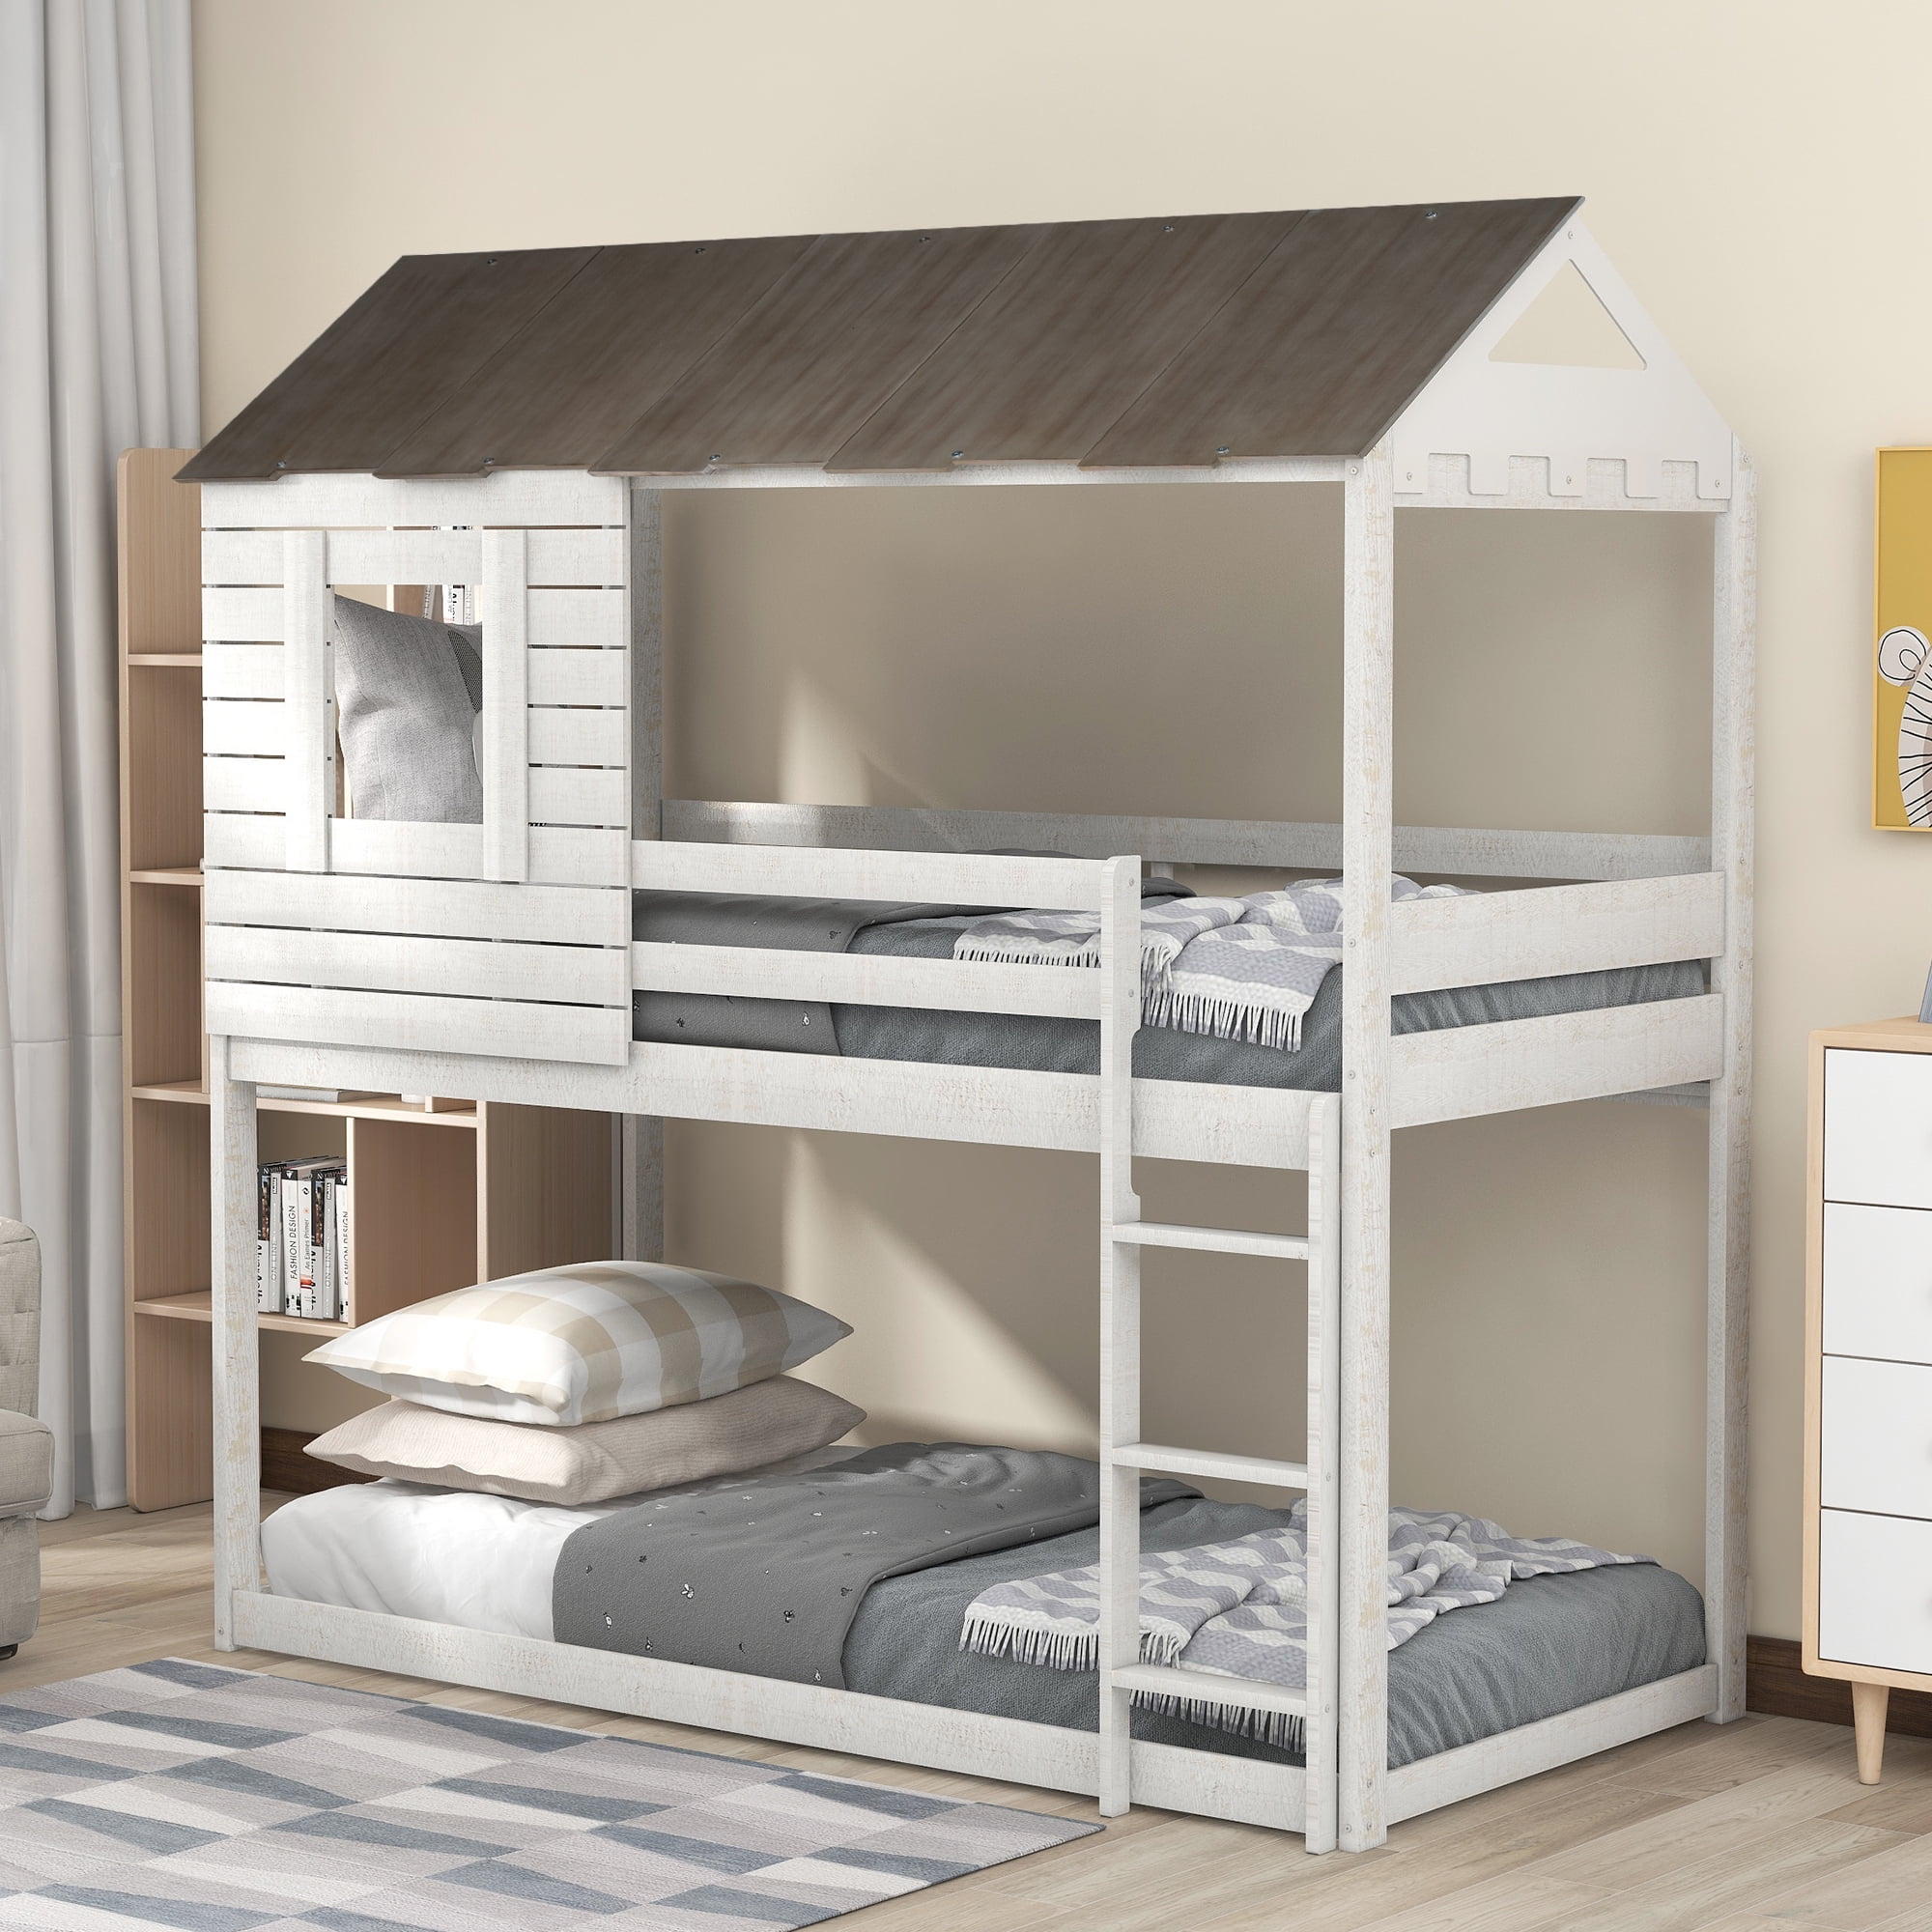 Twin Size Bunk Beds Syngar House Loft, How To Make A Twin Size Bunk Bed